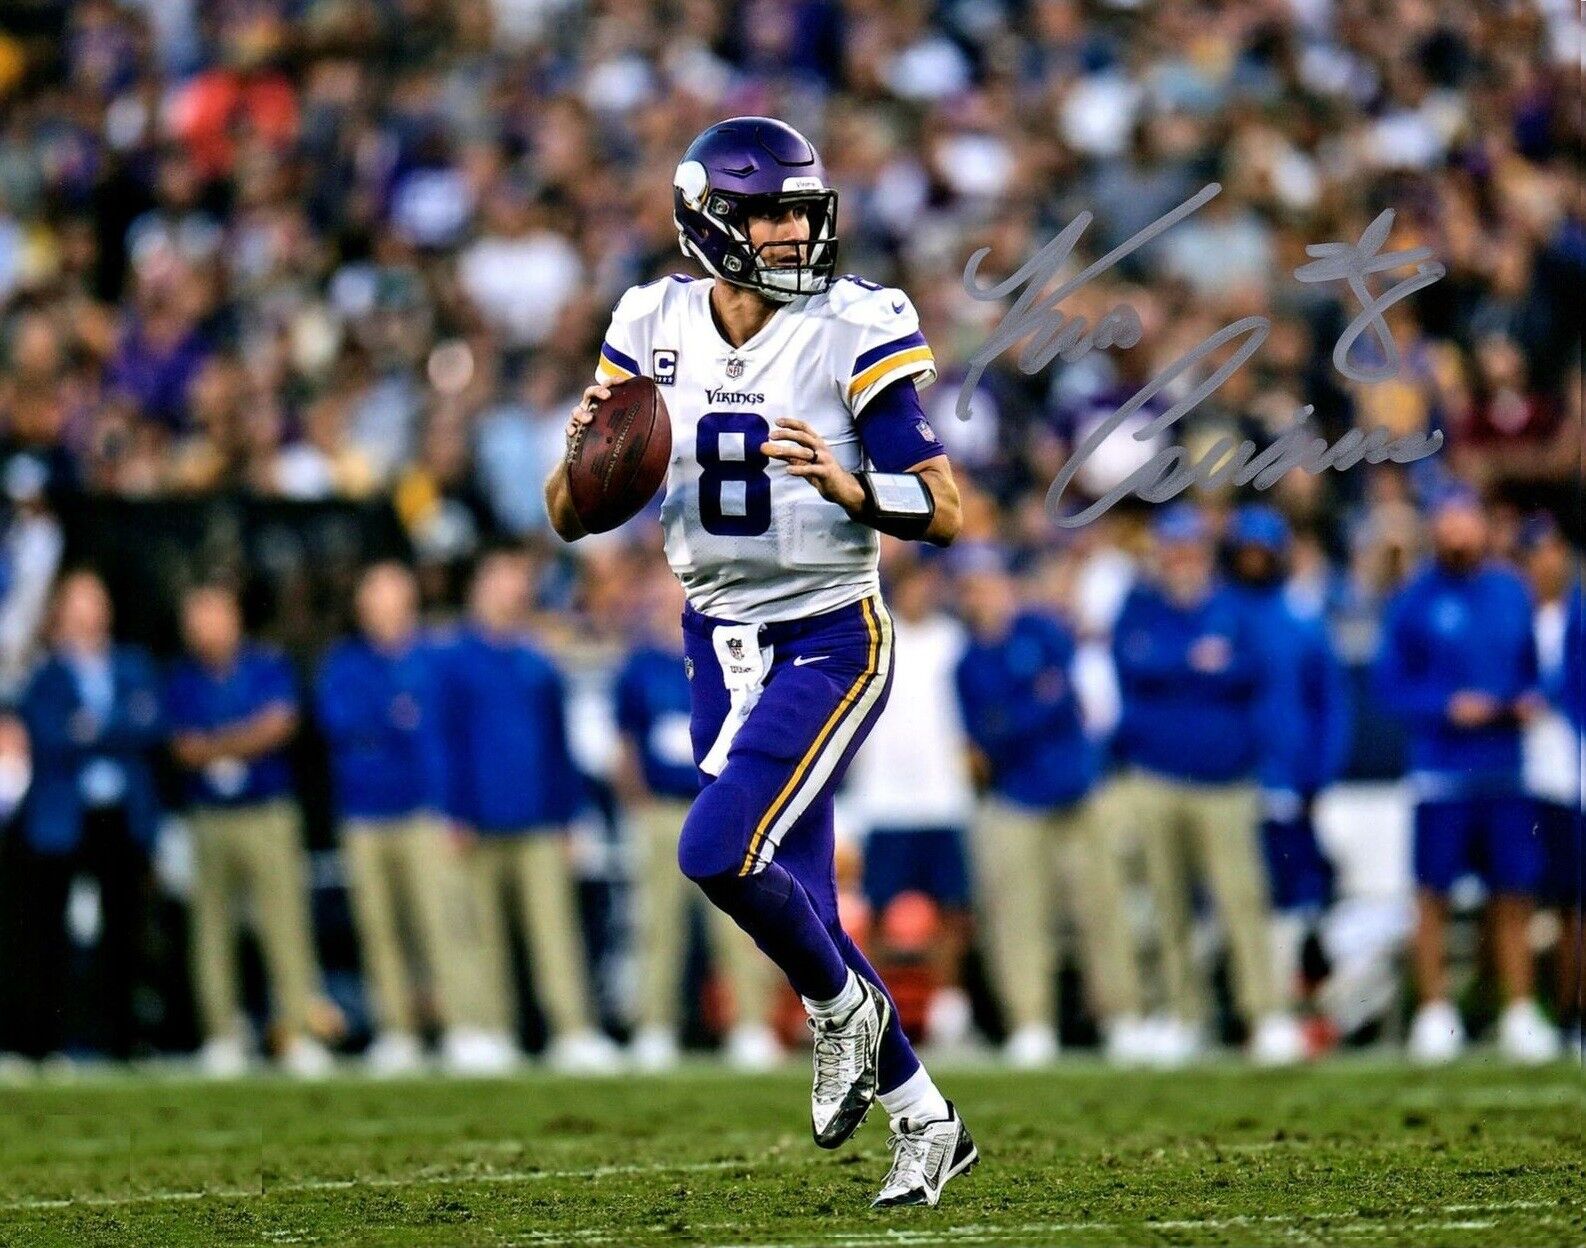 Kirk Cousins Autographed Signed 8x10 Photo Poster painting ( Vikings ) REPRINT ,